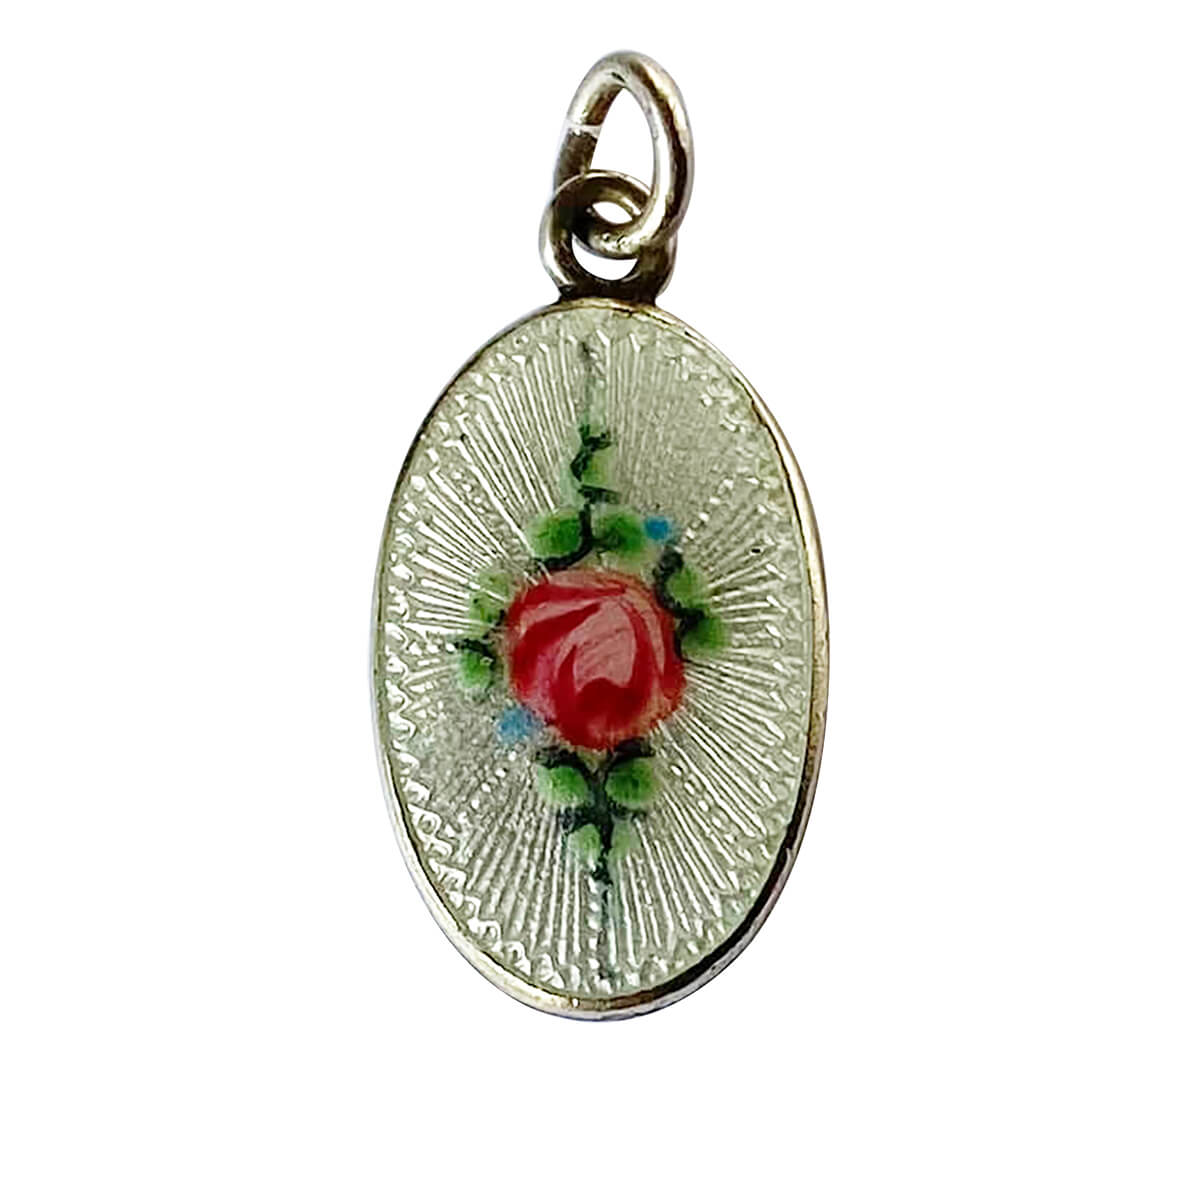 Vintage guilloche enamel pink rose charm sterling silver pendant from Charmarama